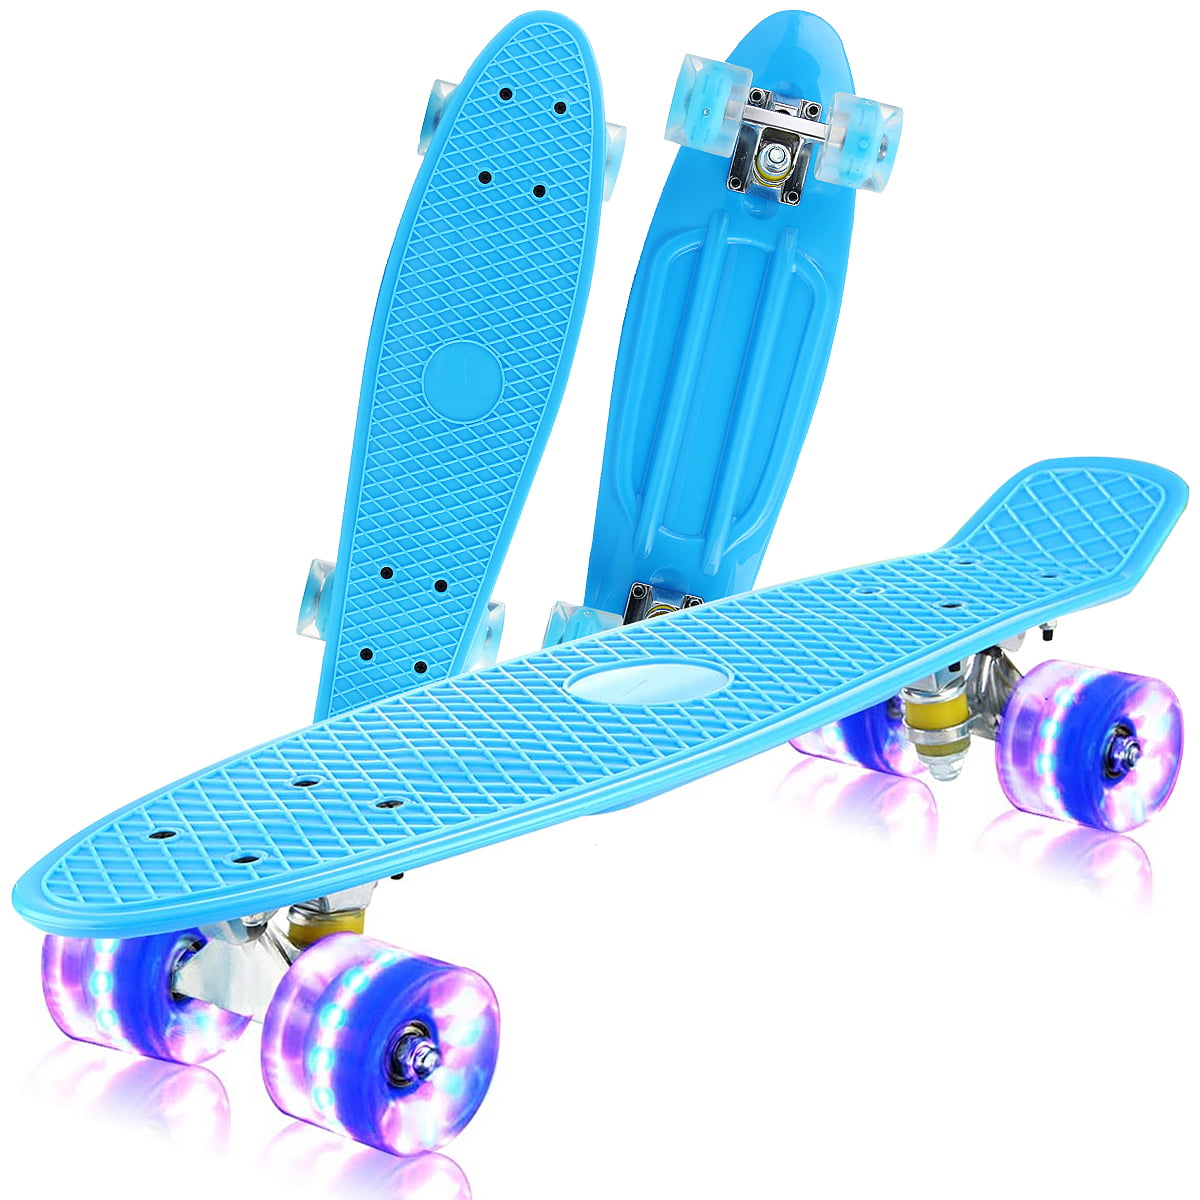 Details about   Kids Trick Complete Skateboard 22"x 6" Double Kick Concave Skateboards Gift Fun 